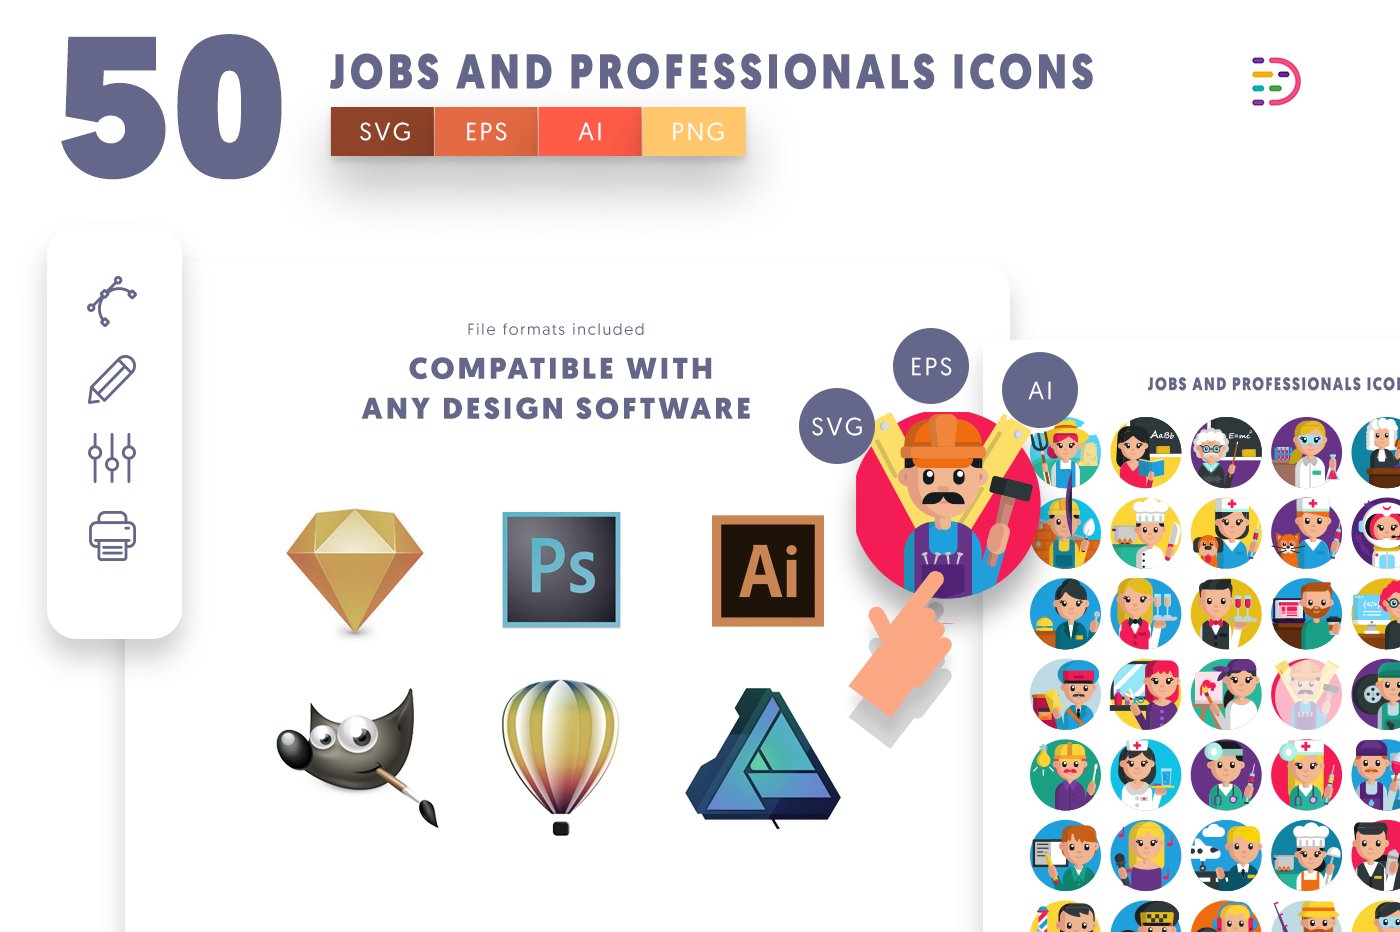 jobandprofessionals icons cover 8 67